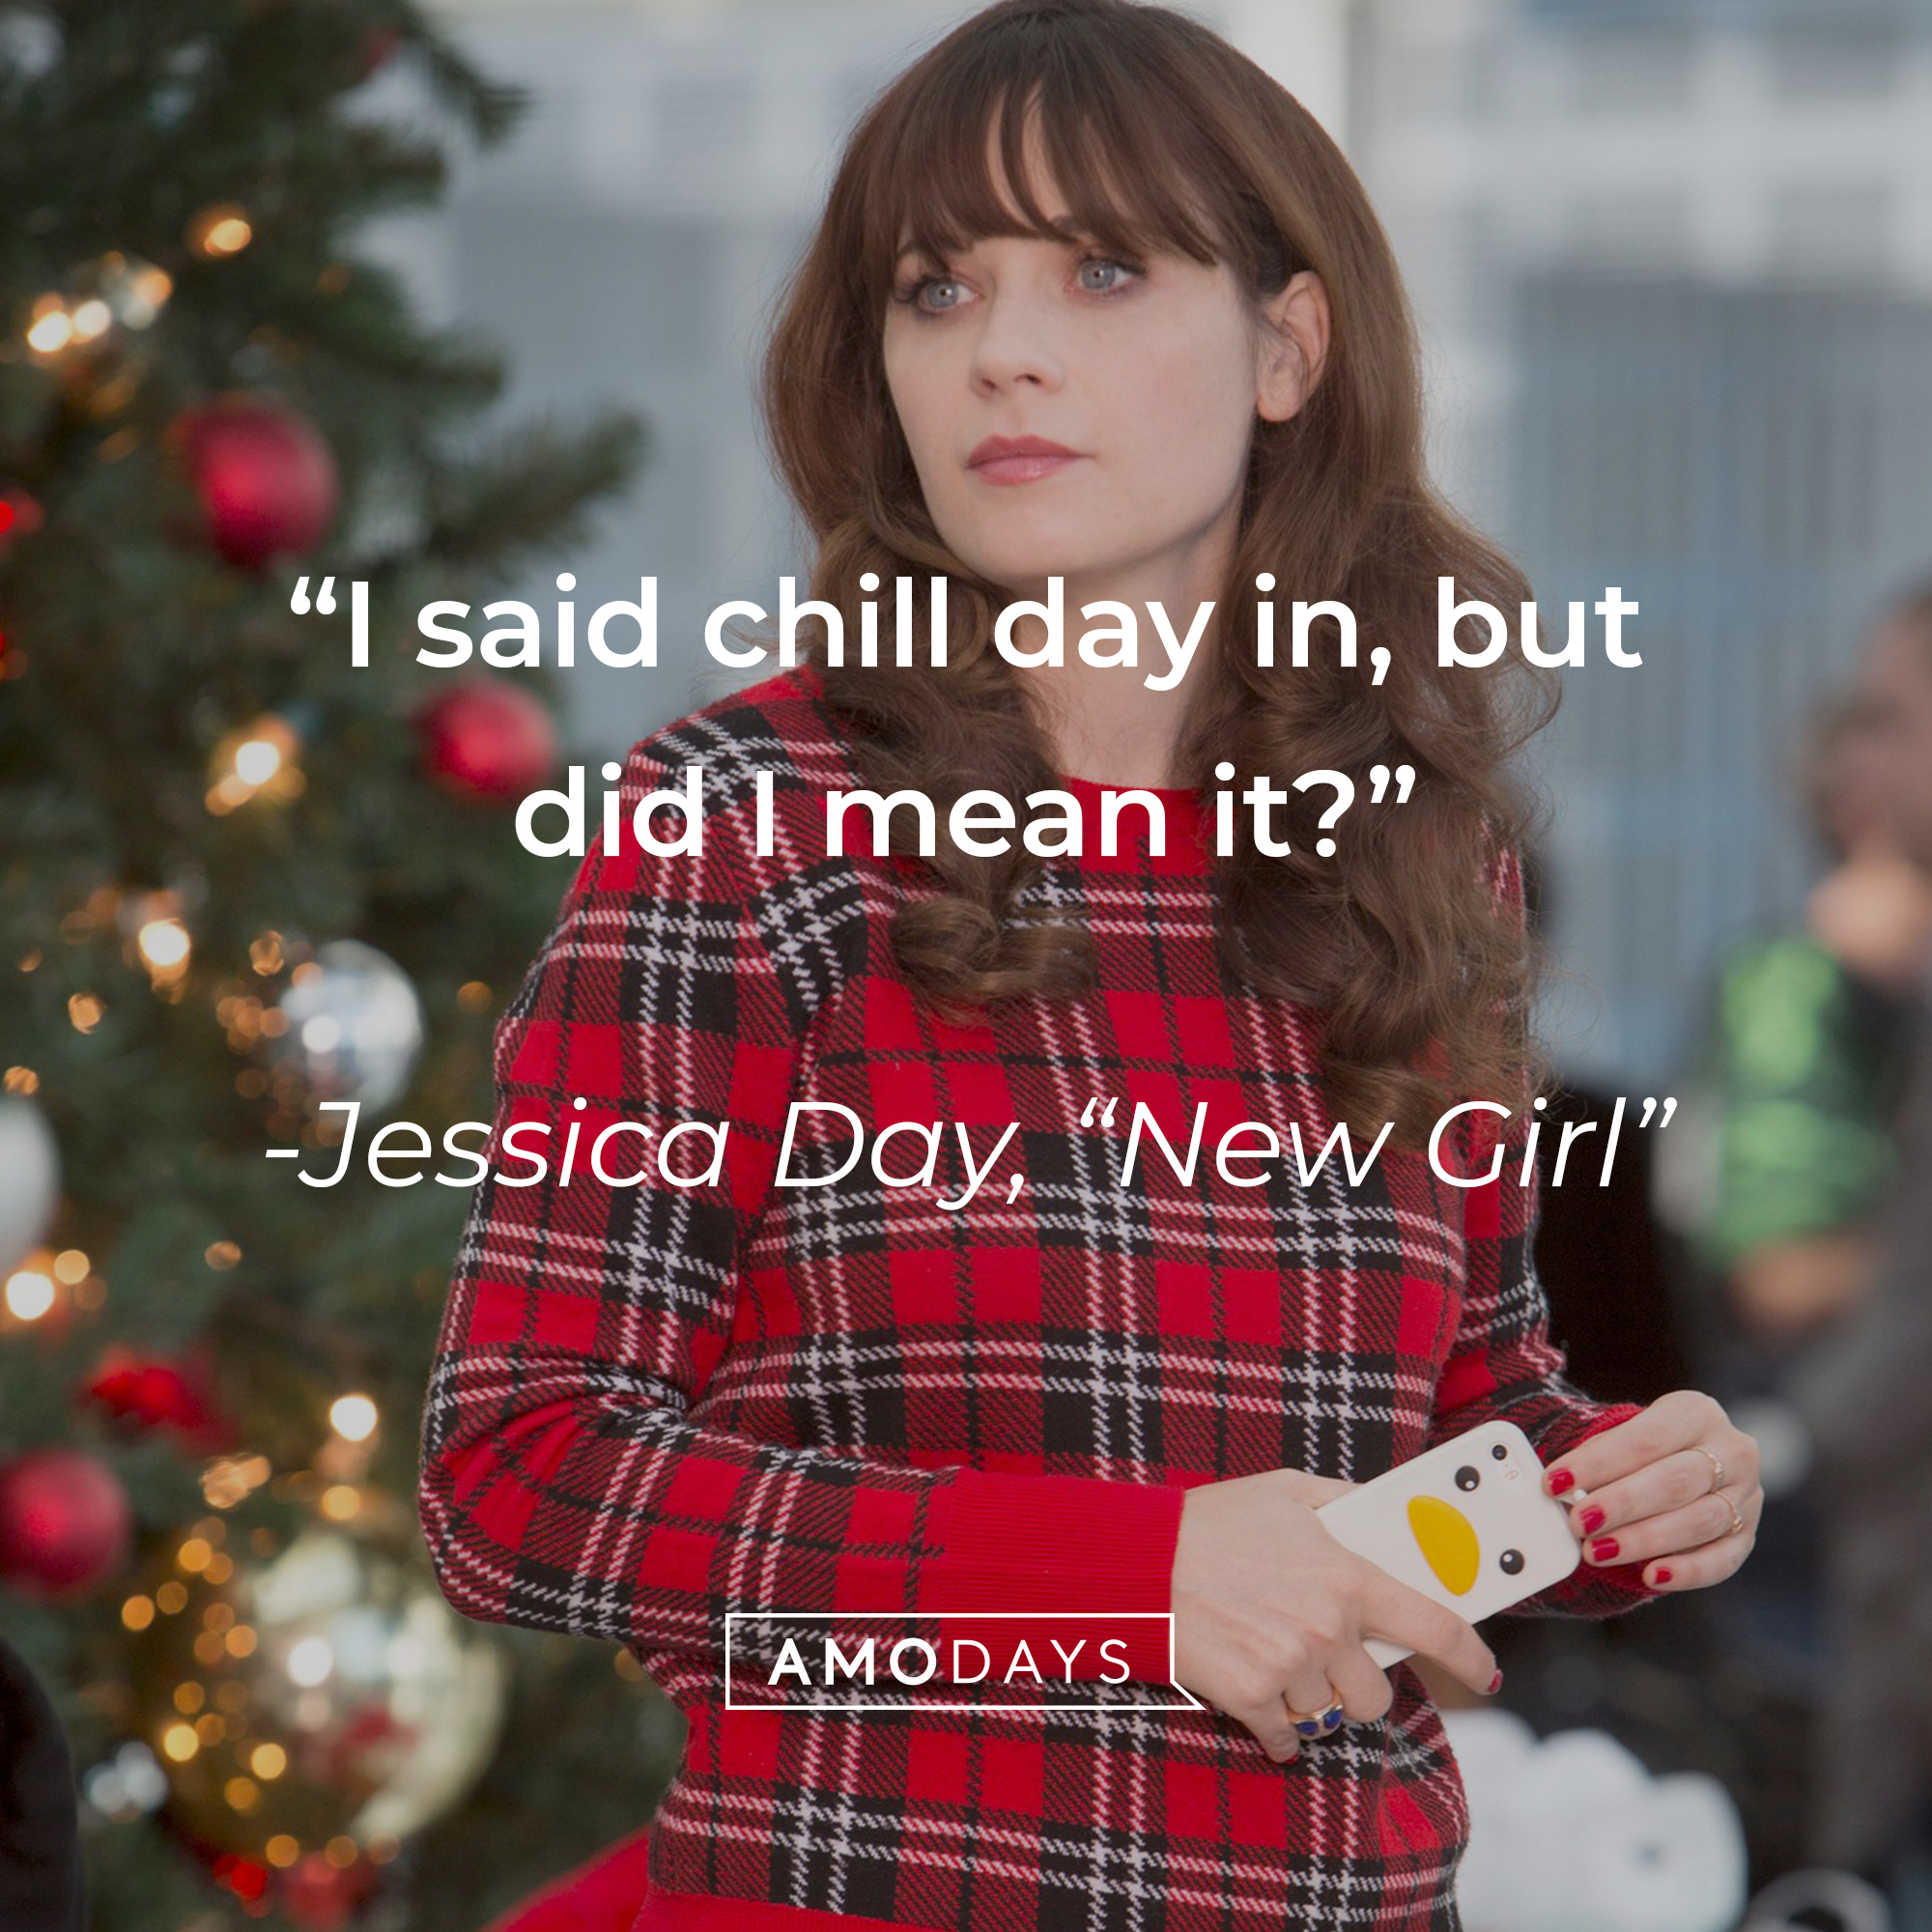 Jessica Day’s quote from “New Girl”: “I said chill day in, but did I mean it?” | Source: facebook.com/OfficialNewGirl